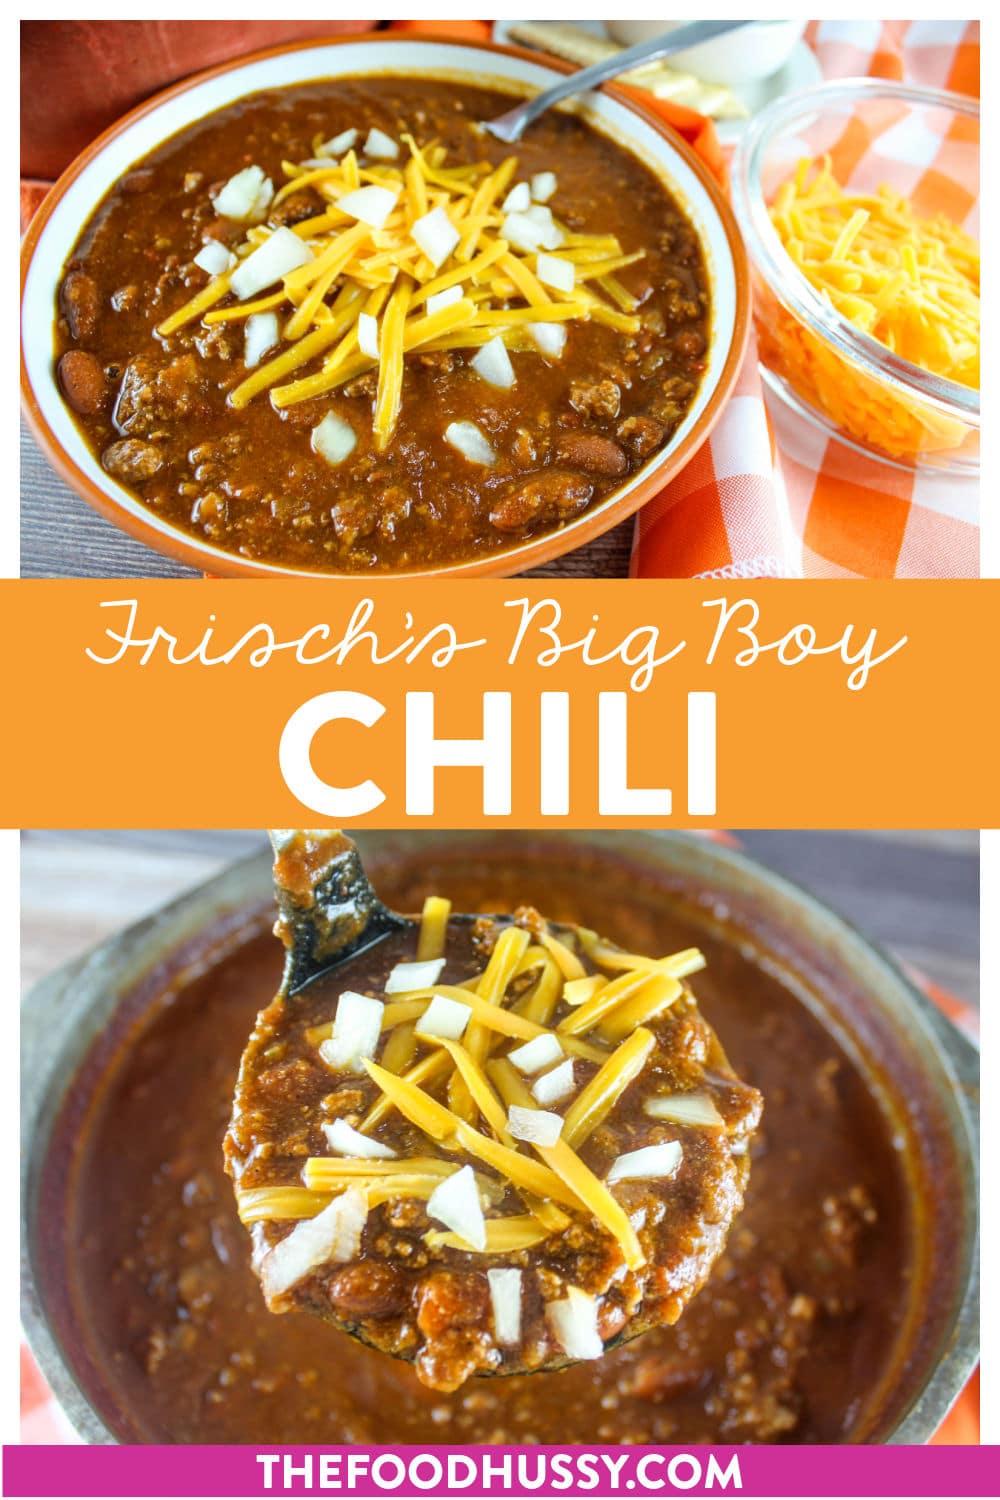 Frisch's Chili recipe is going to be a family favorite! Loaded with beefy flavor - you'll enjoy bowl after bowl - topped with cheese and diced onion. Make this Ohio specialty wherever you are!  via @foodhussy